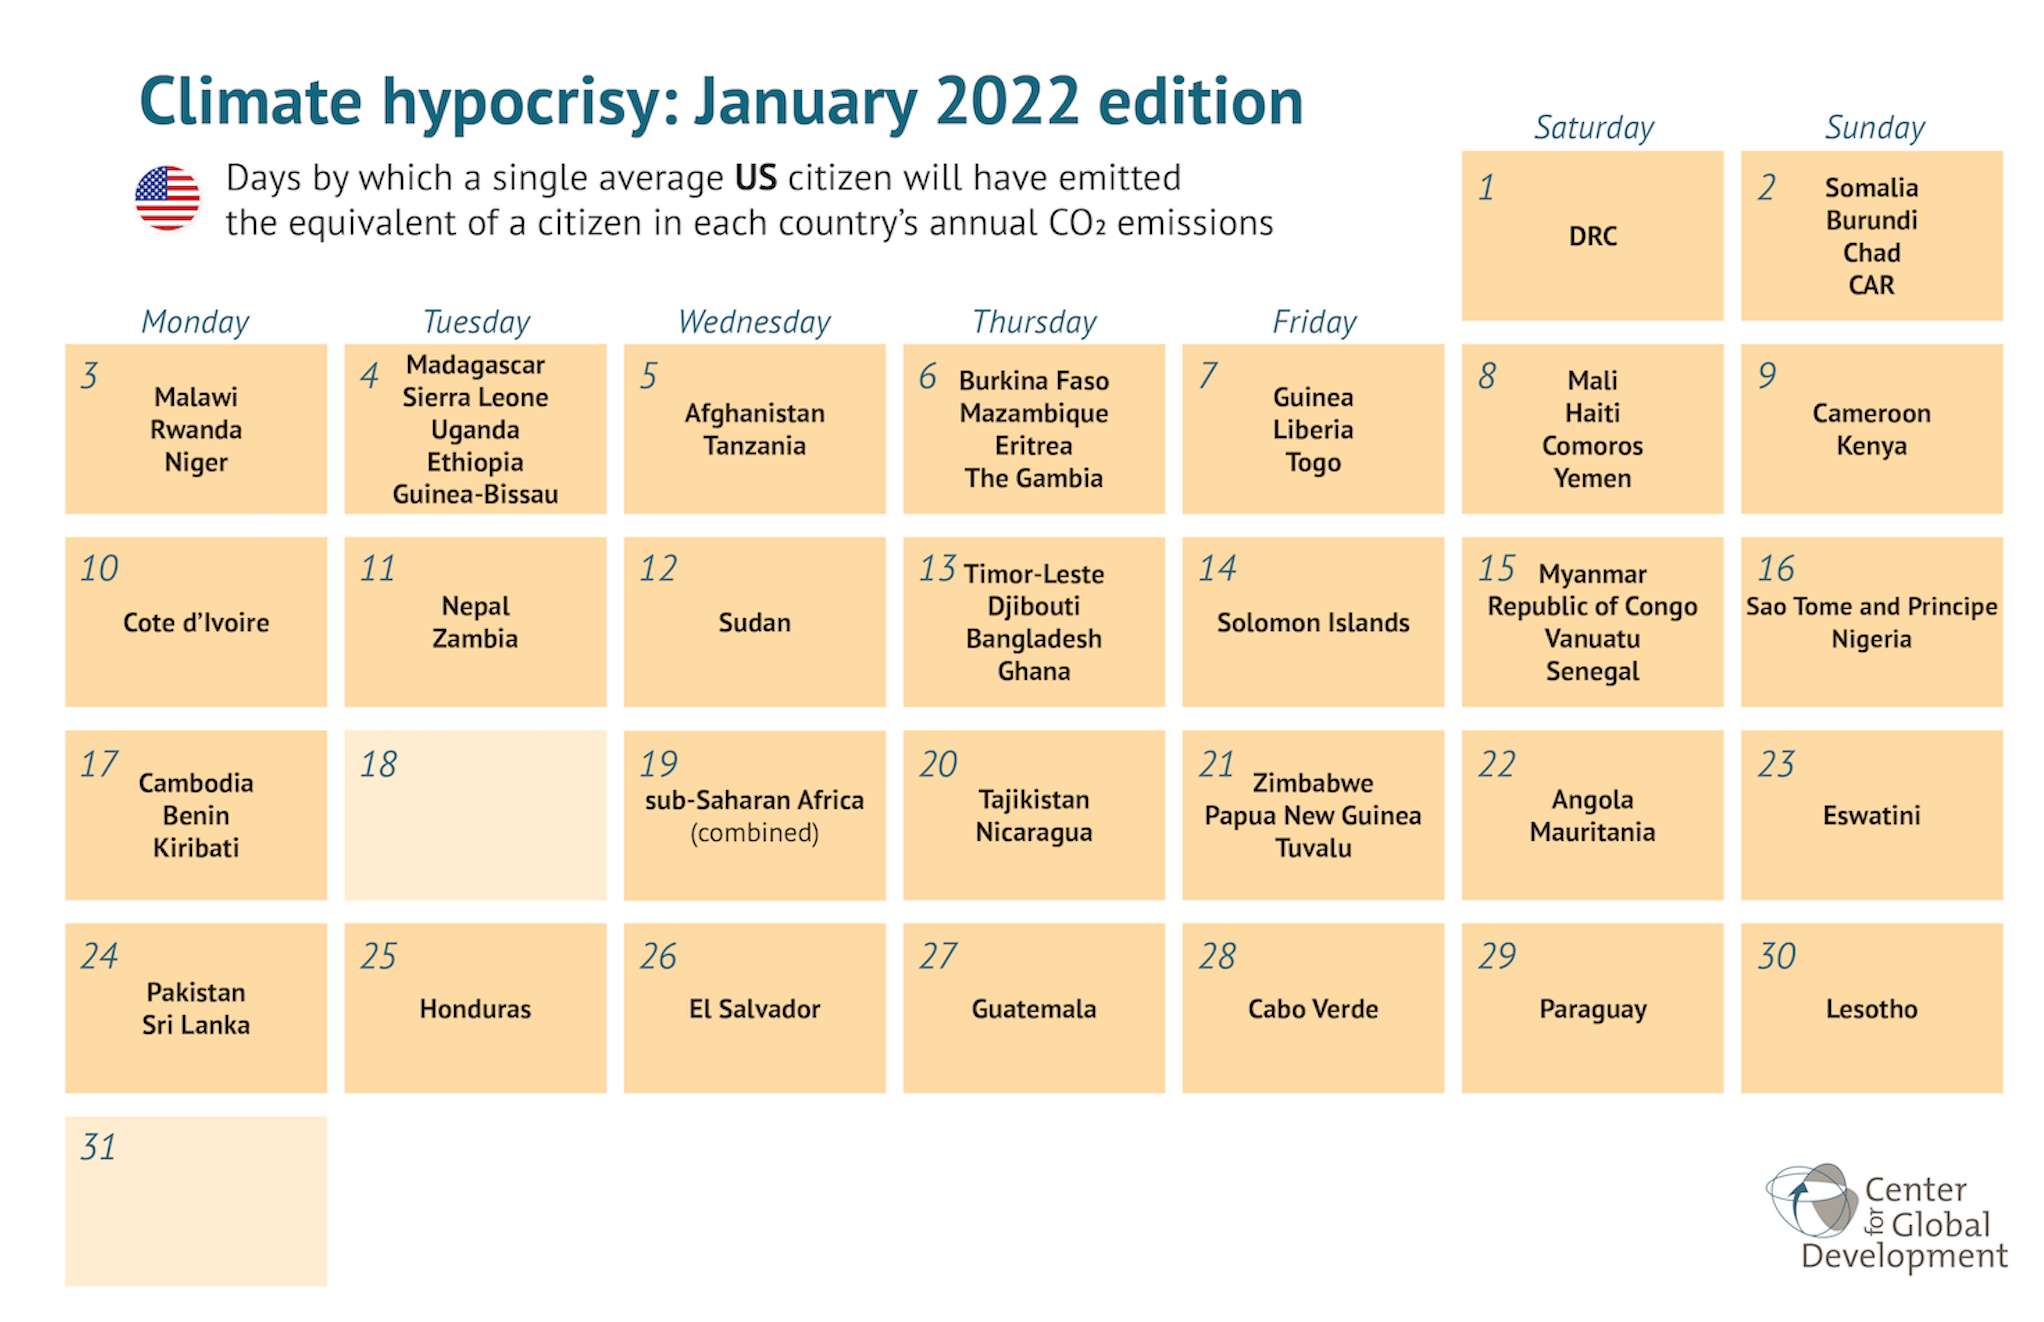 Labelled calendar showing the several dozen lower-income countries the US will surpass in annual per capita emissions in January alone.